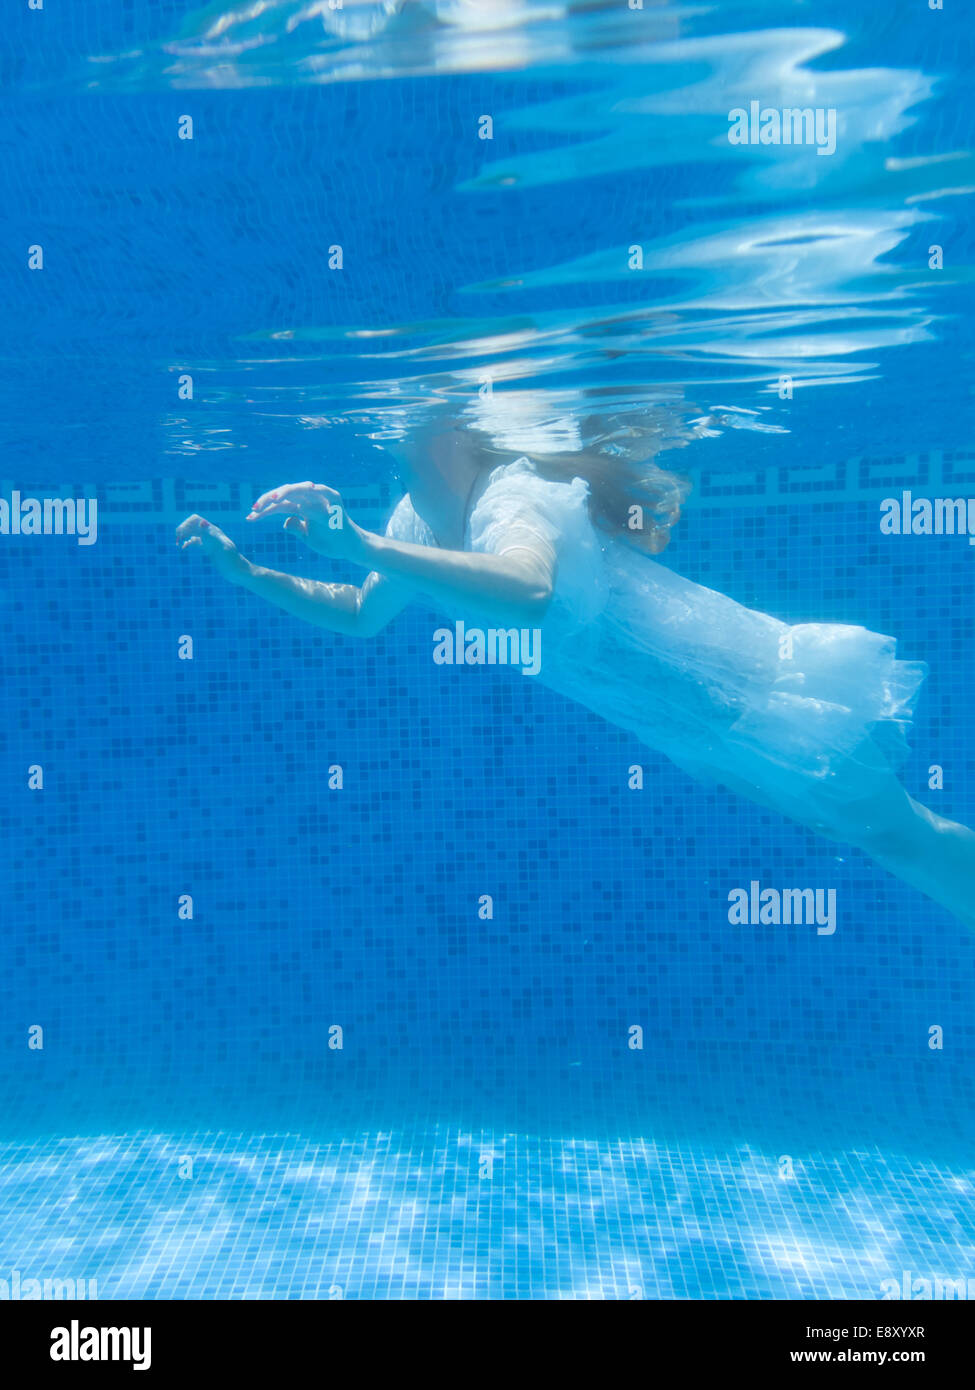 woman floating in a swimming pool Stock Photo